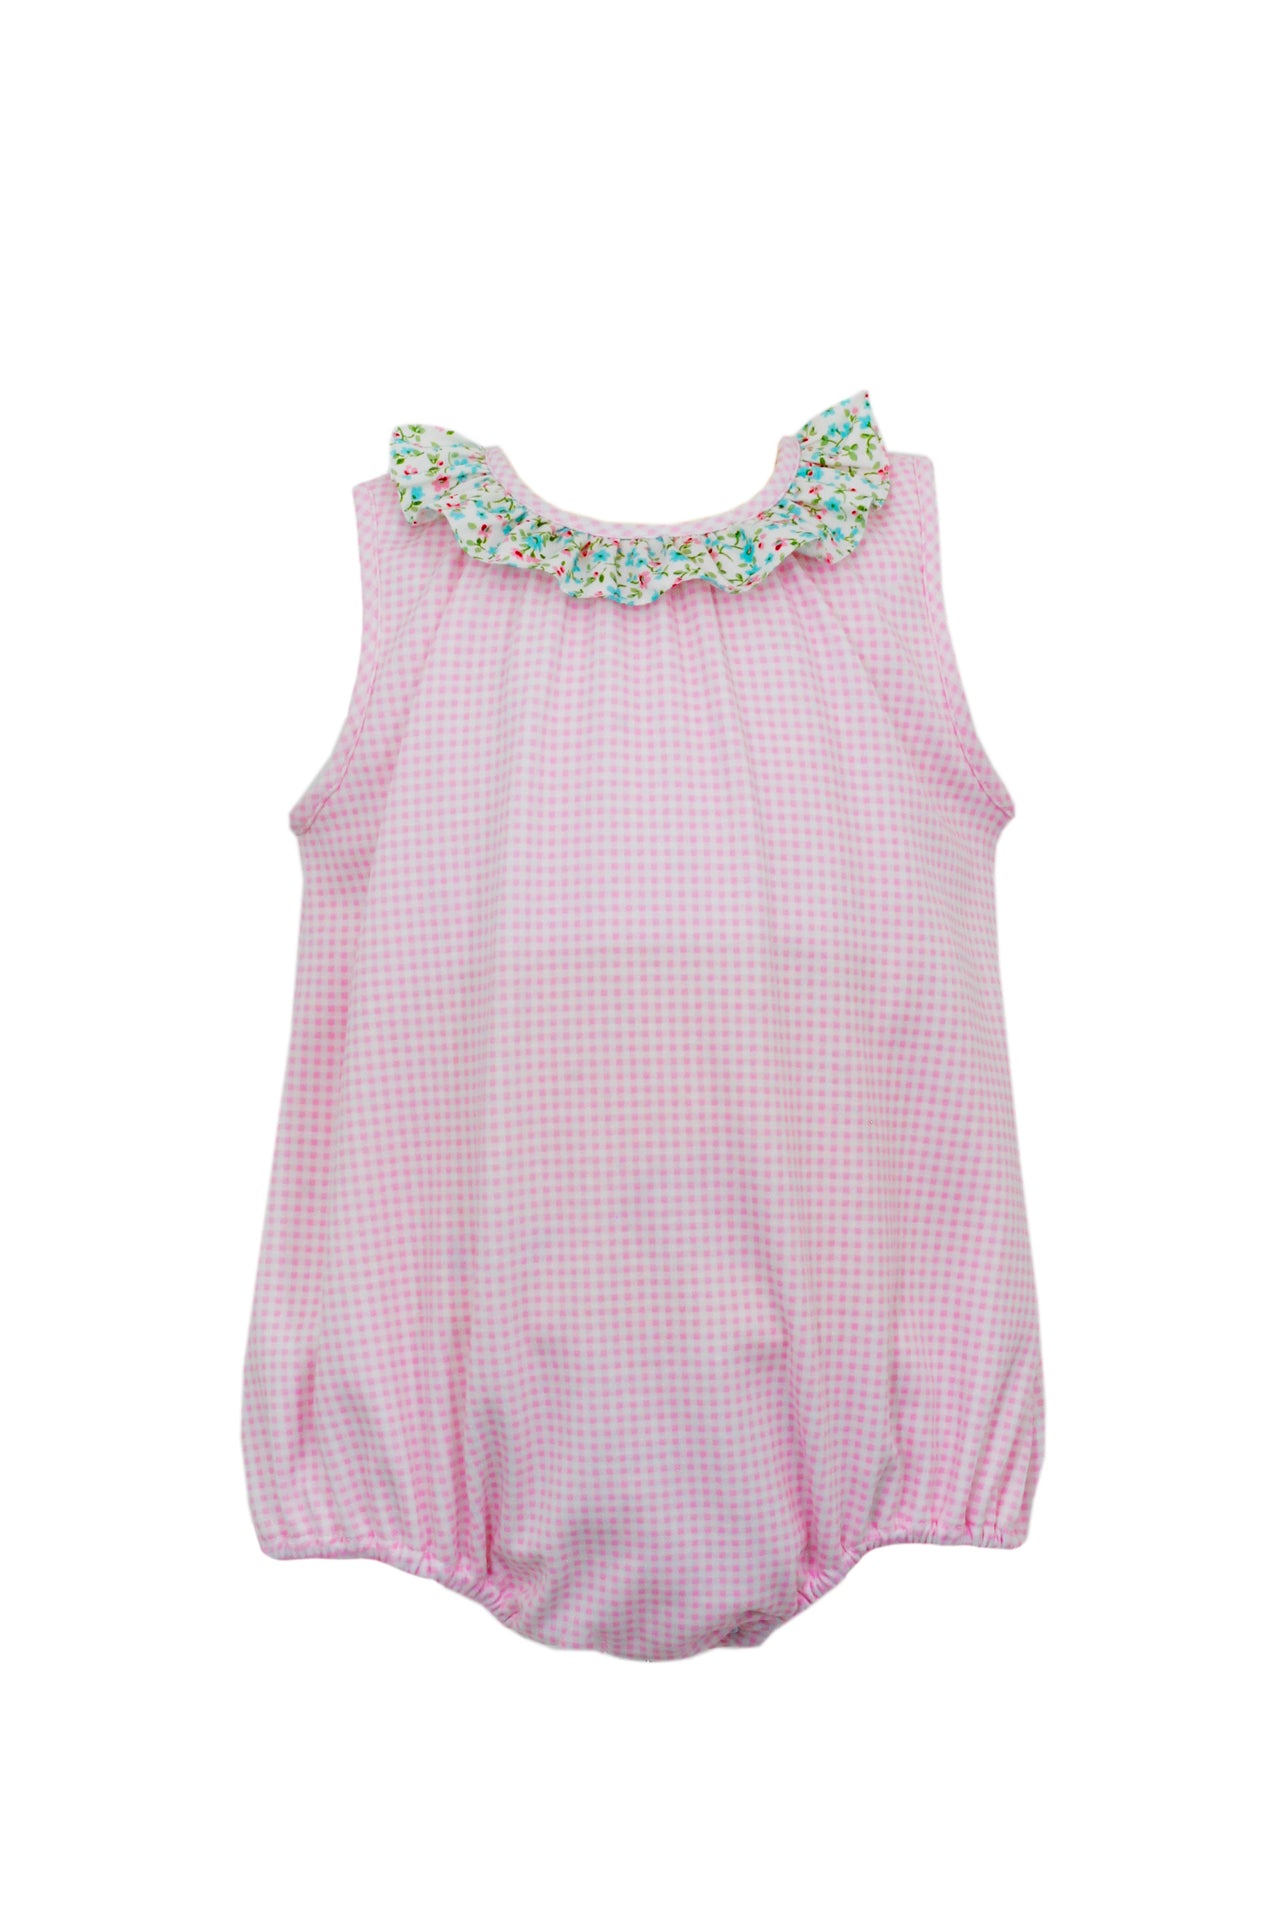 Petit Bebe Leah Pink Gingham Knit W/Pink and Blue Floral Trim Girl's Bubble 412F-MS24 5102